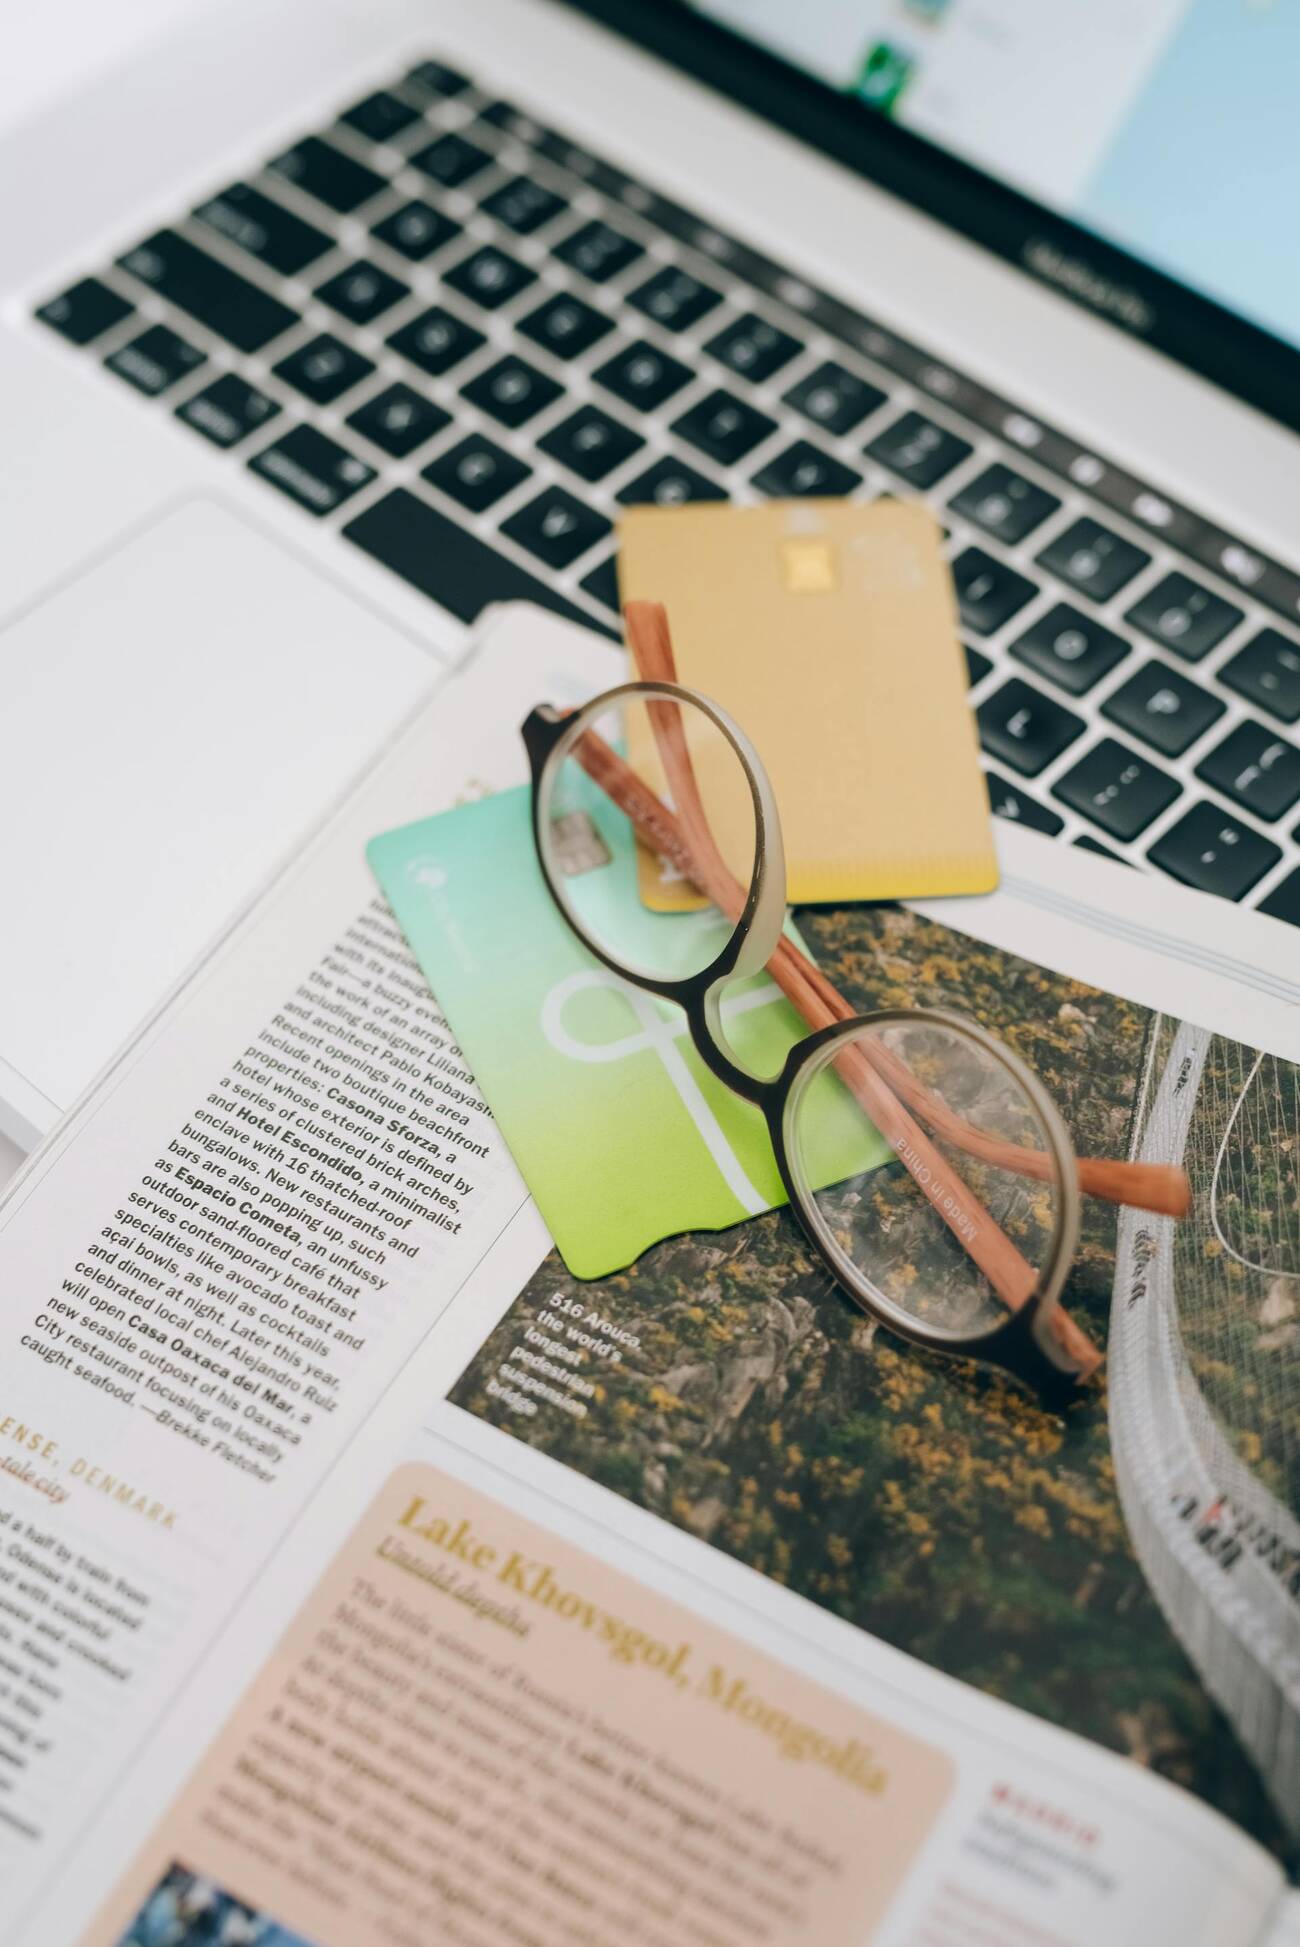 Eyeglasses, credit cards, and an opened page of a magazine on top of a laptop